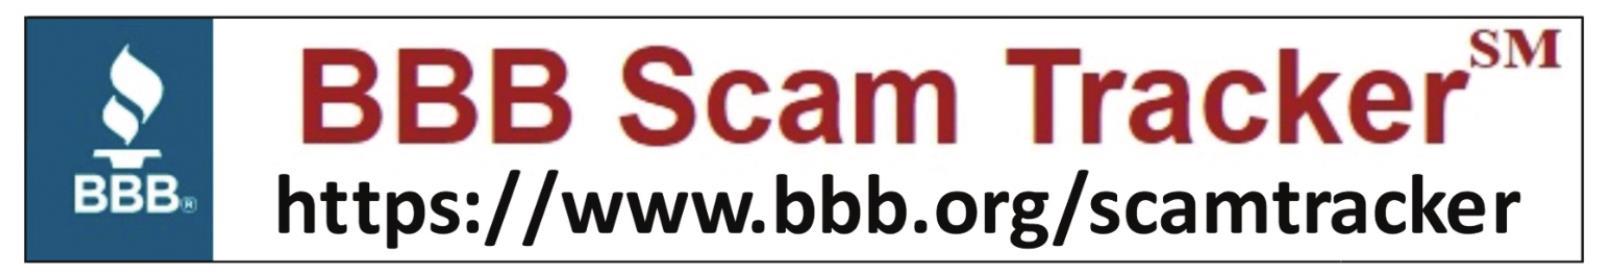 Scammers spoofing BBB phone number pose as Amazon